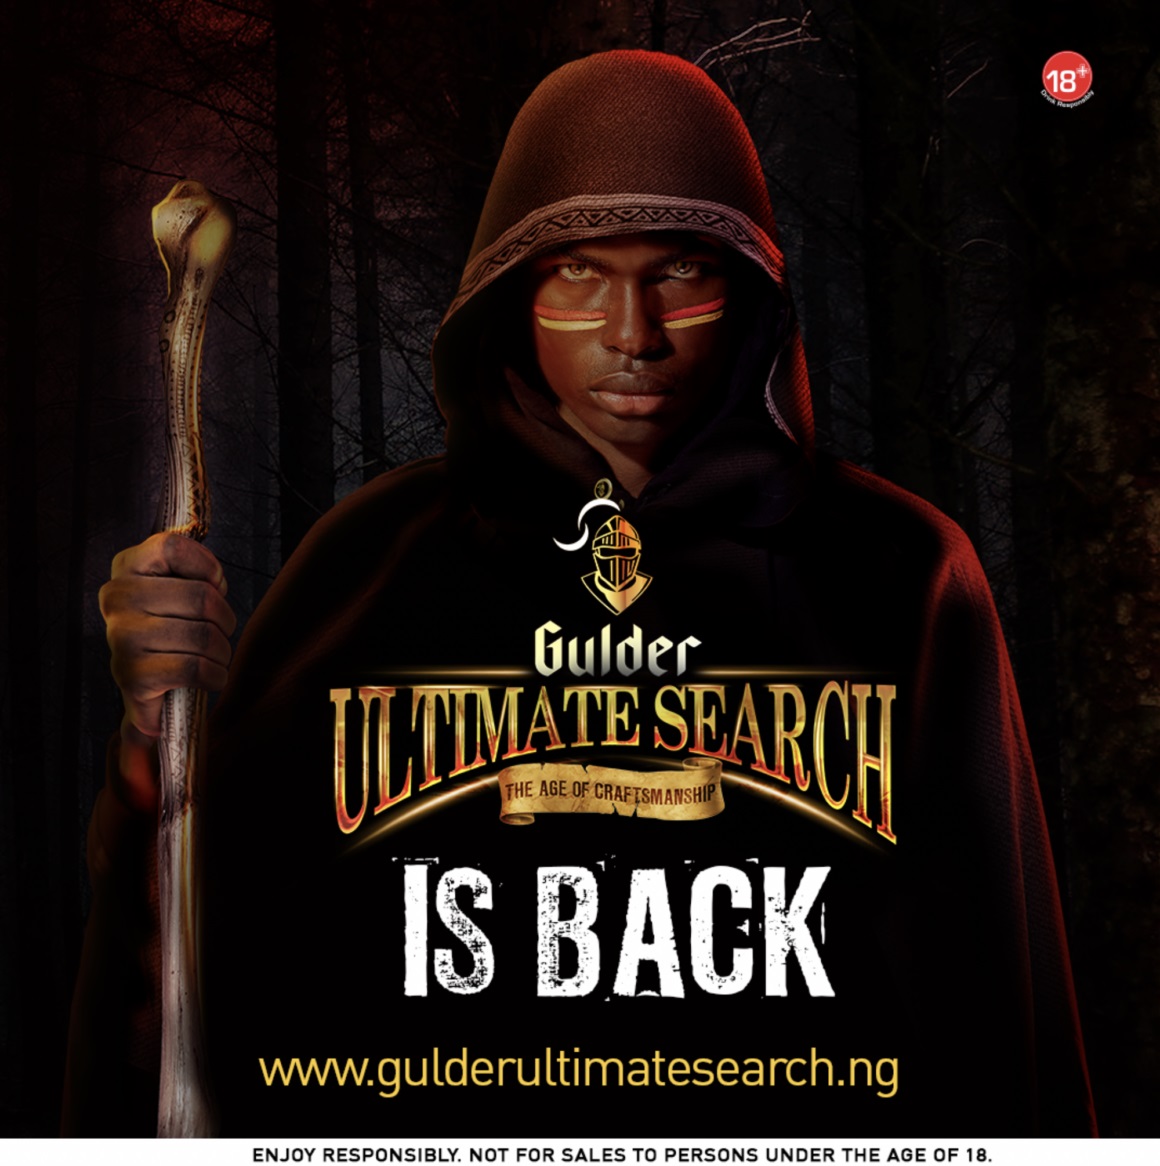 Toke Makinwa unveiled as 2021 Gulder Ultimate Search anchor (Video)